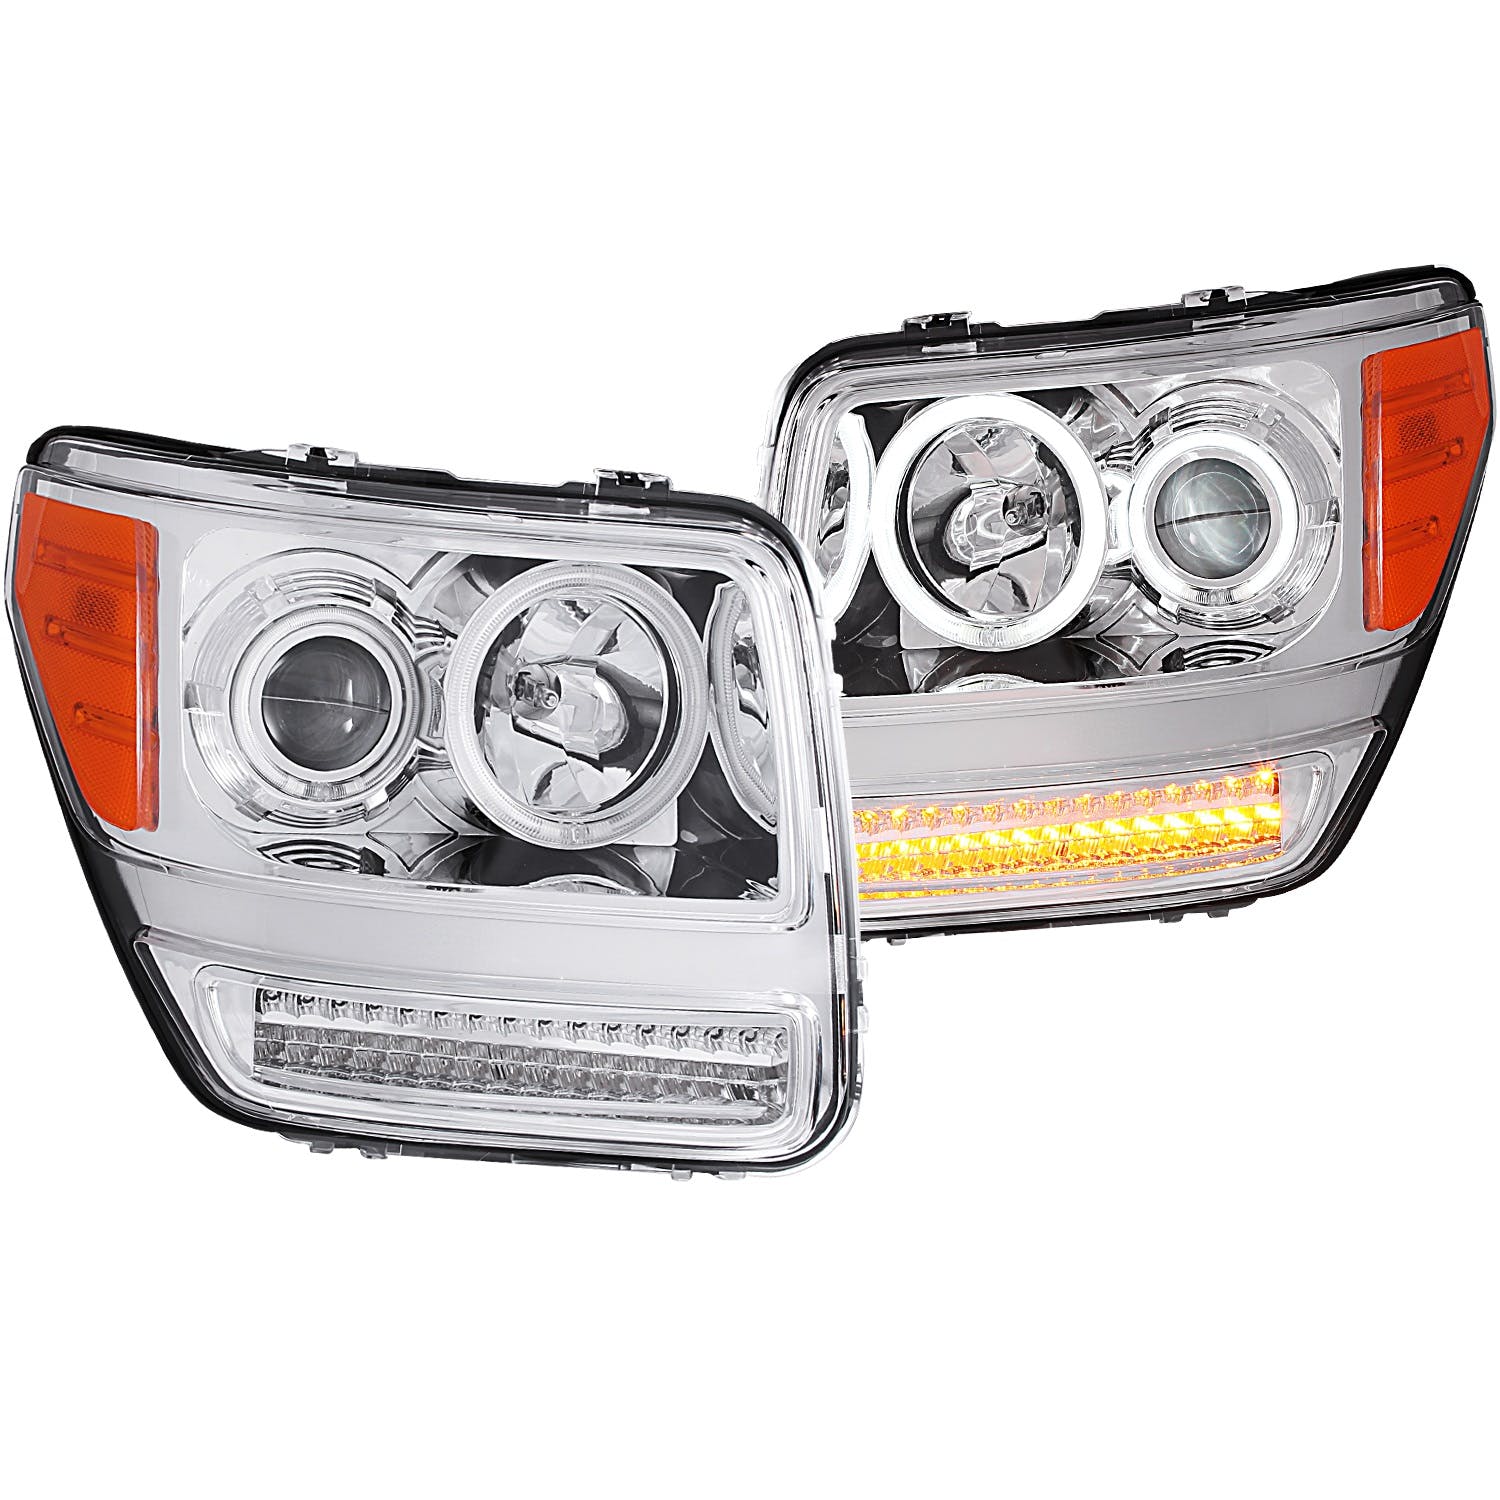 AnzoUSA 111144 Projector Headlights with Halo Chrome (SMD LED) G2